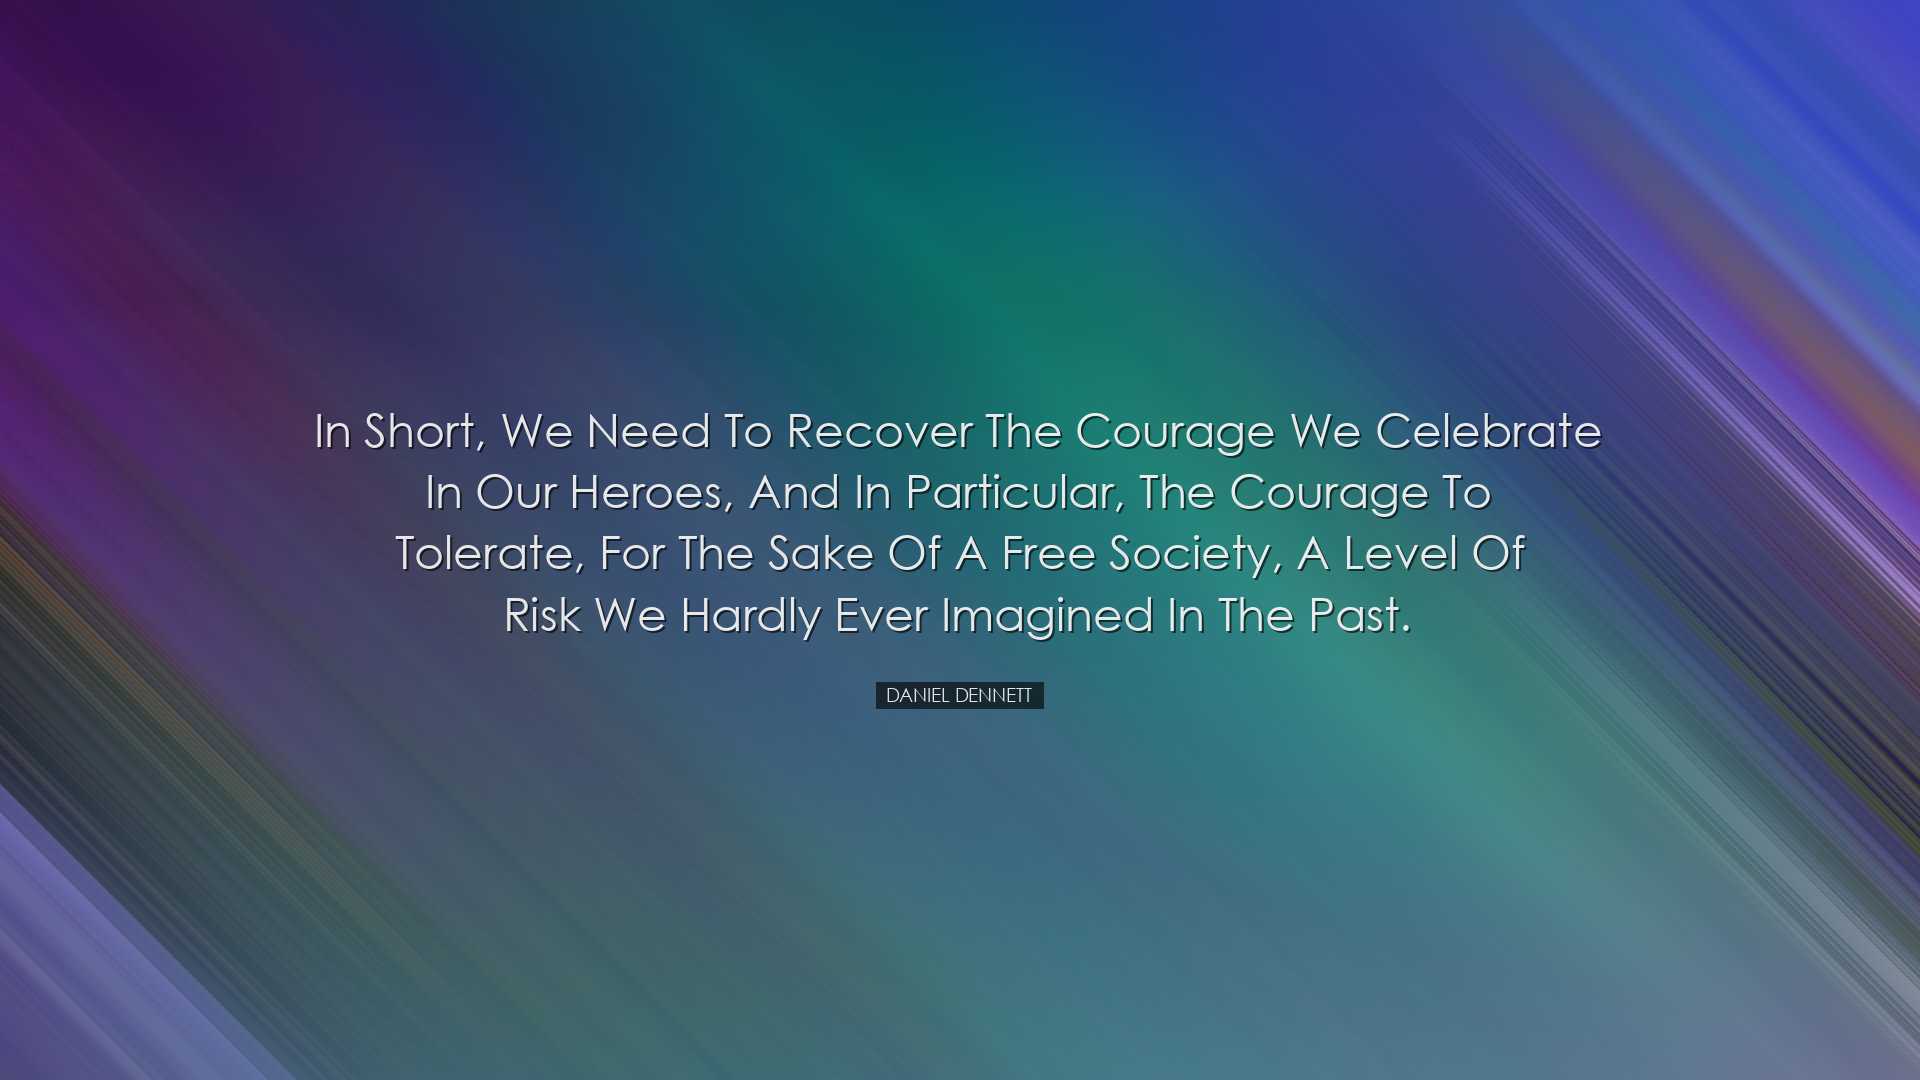 In short, we need to recover the courage we celebrate in our heroe